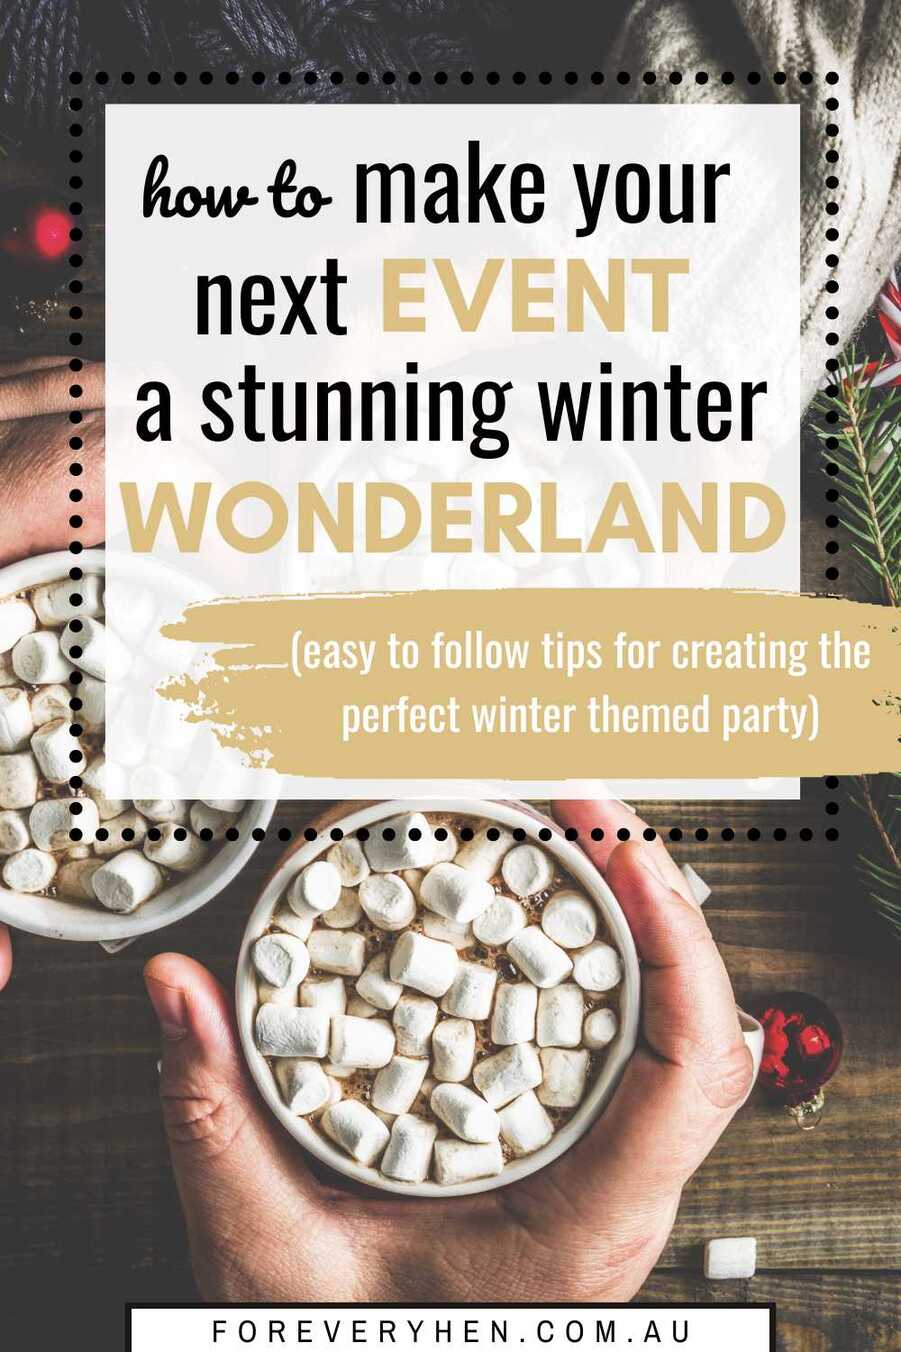 Image of a person holding a hot chocolate filled with mini marshmallows. Text overlay: How to make your next event a stunning winter wonderland (easy to follow tips for creating the perfect winter themed party)